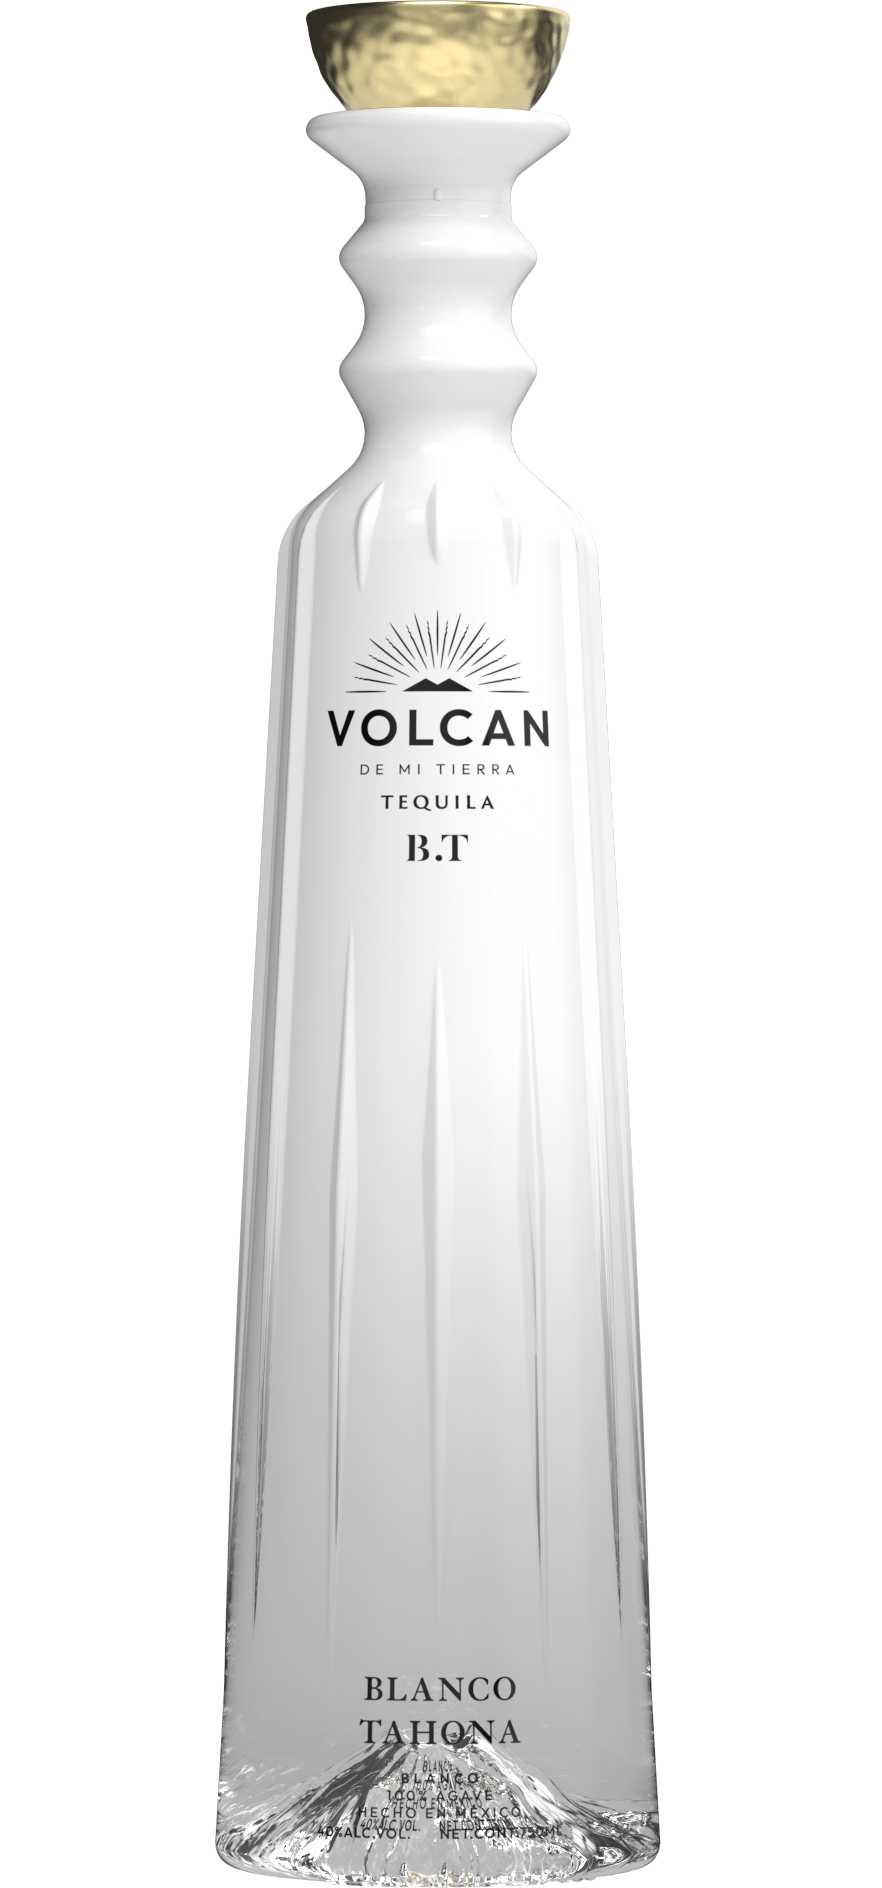 Volcan De Mi Tierra Tequila Tahona Blanco 700ml, showcasing a clear bottle with elegant, minimalist labeling that highlights the crystal-clear tequila made from traditional Tahona-pressed blue agave.